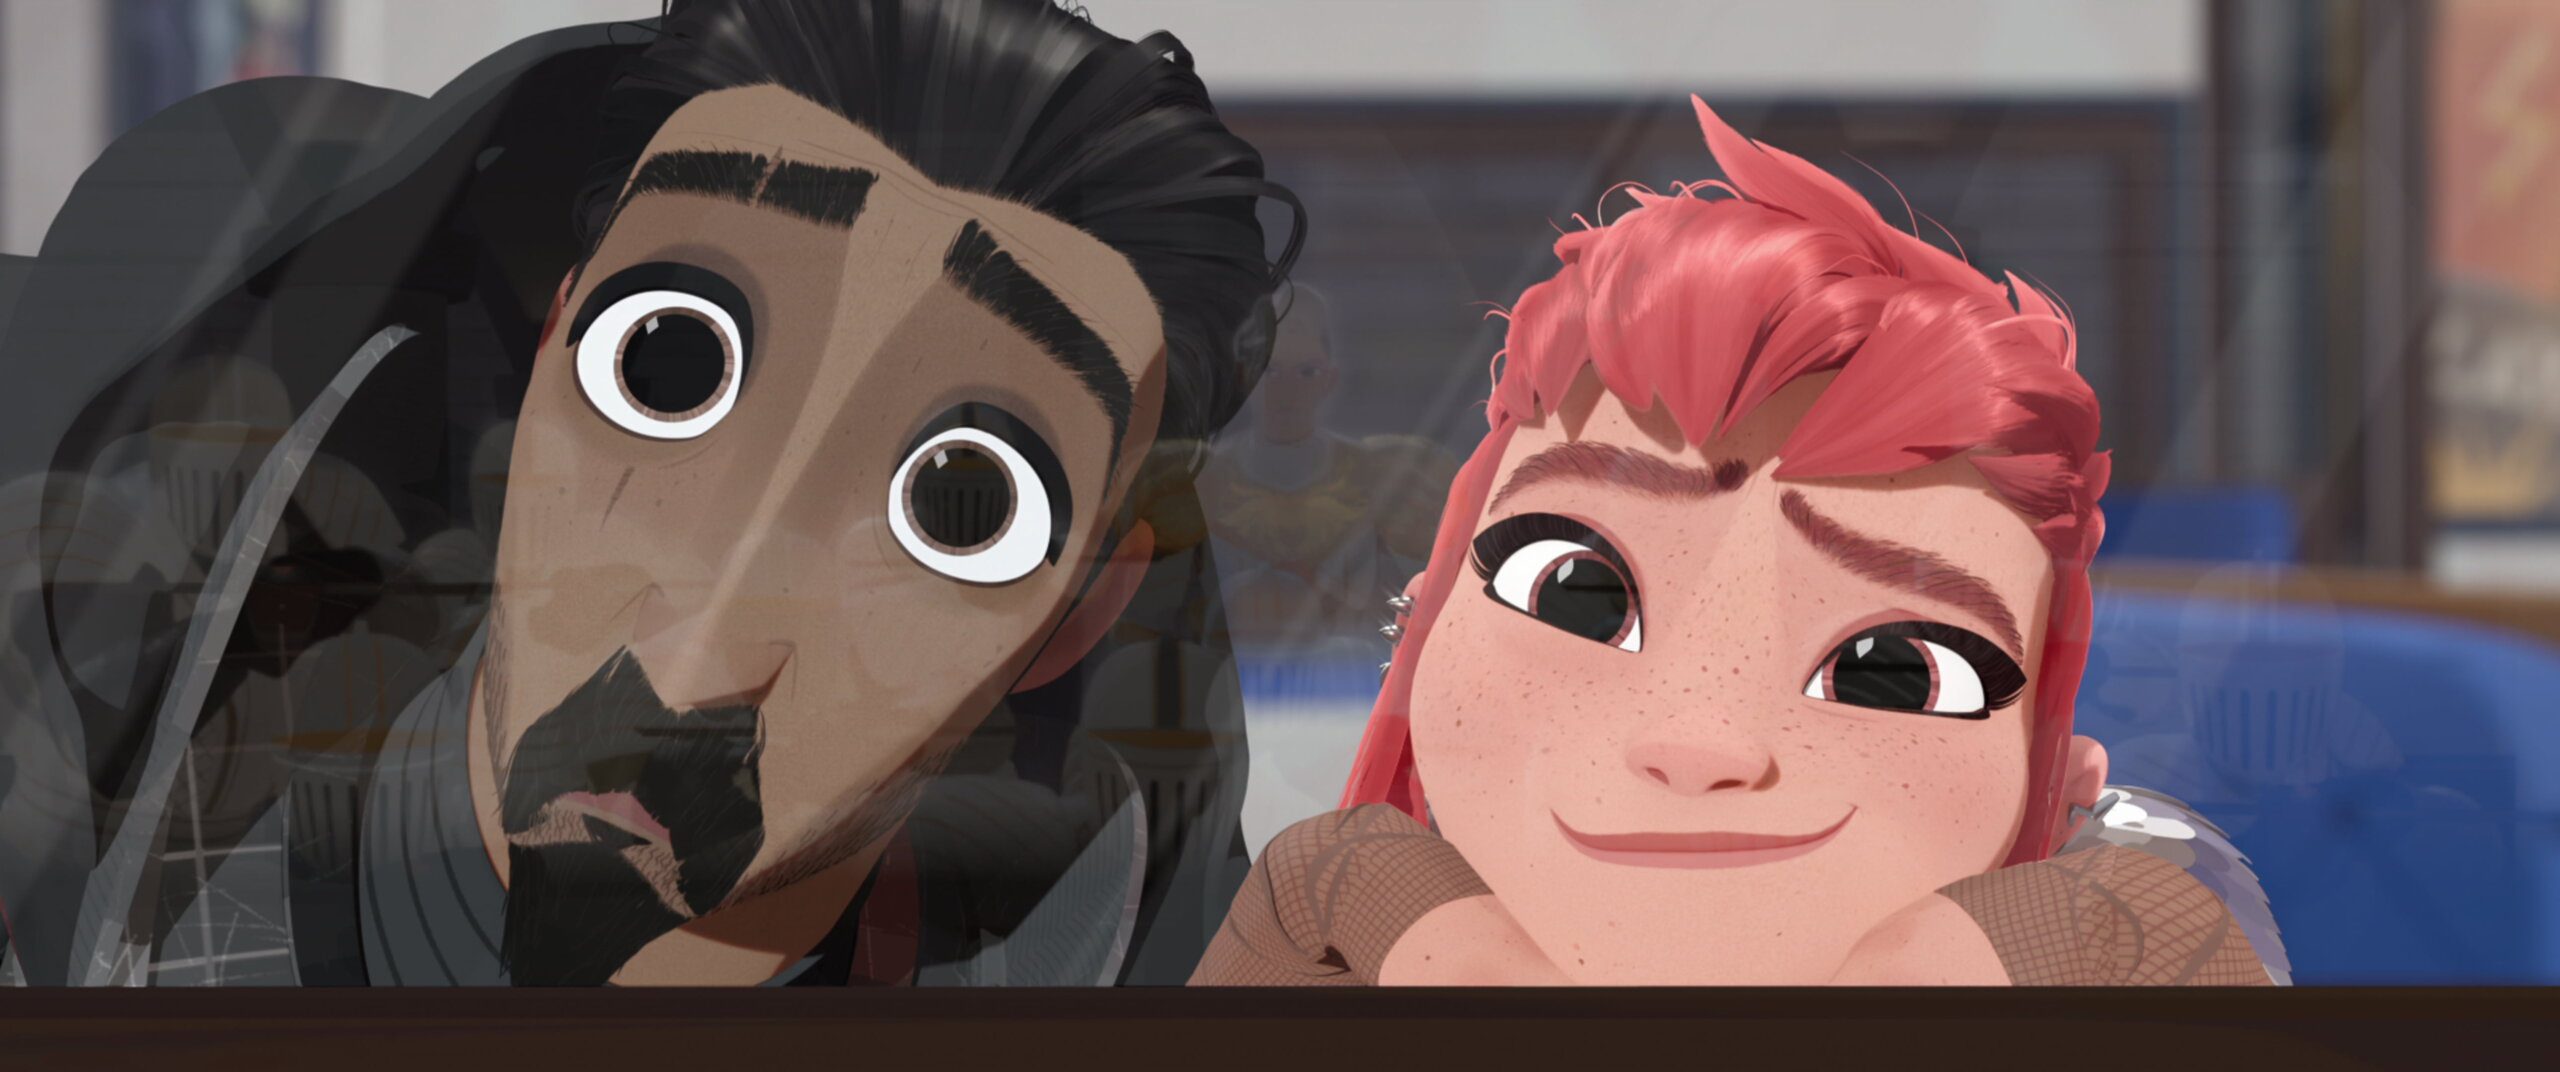 Tangled Ever After Porn - Nimona' is the queer movie of the moment | Xtra Magazine